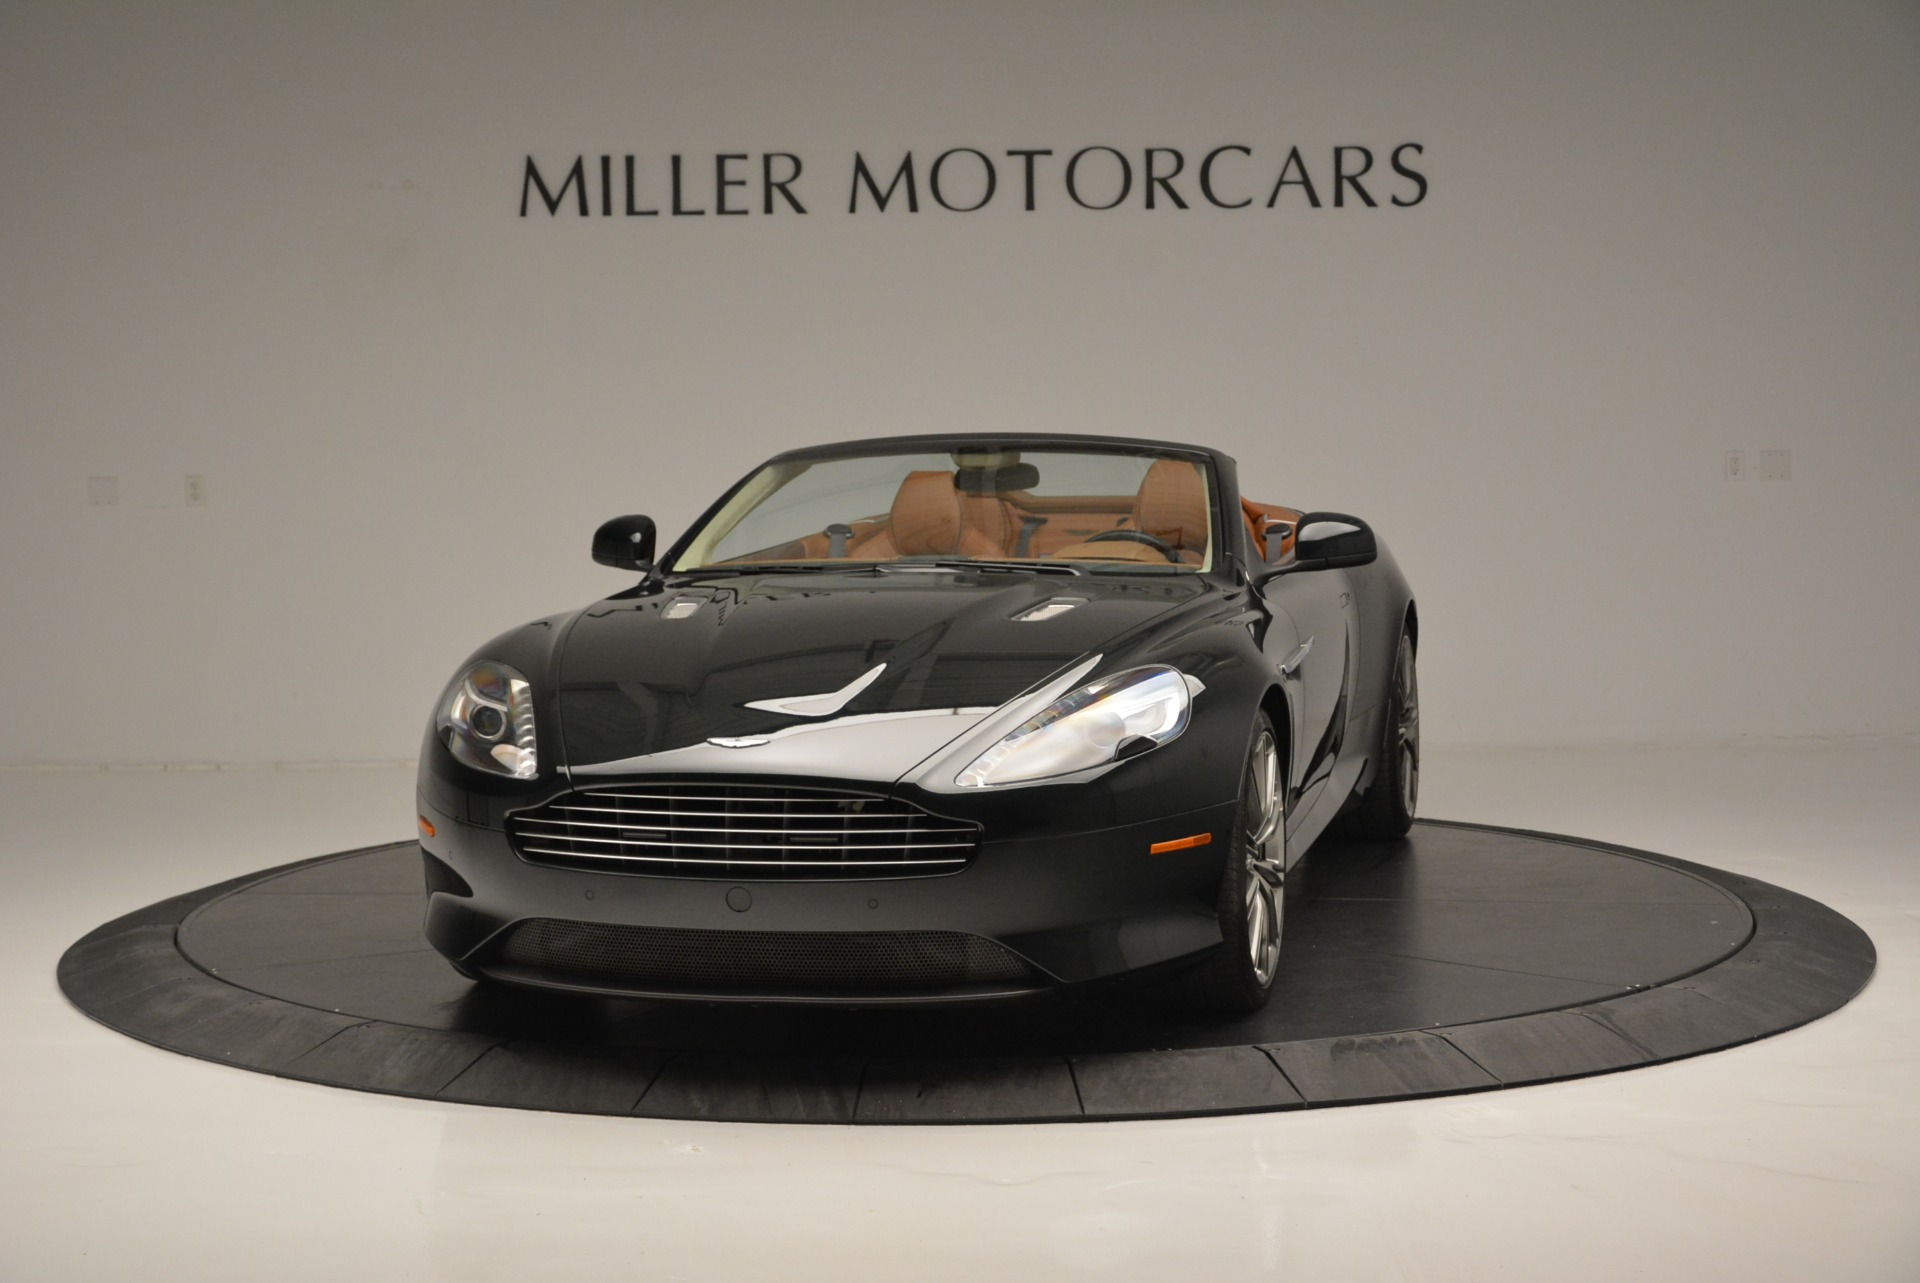 Used 2012 Aston Martin Virage Volante for sale Sold at Maserati of Westport in Westport CT 06880 1